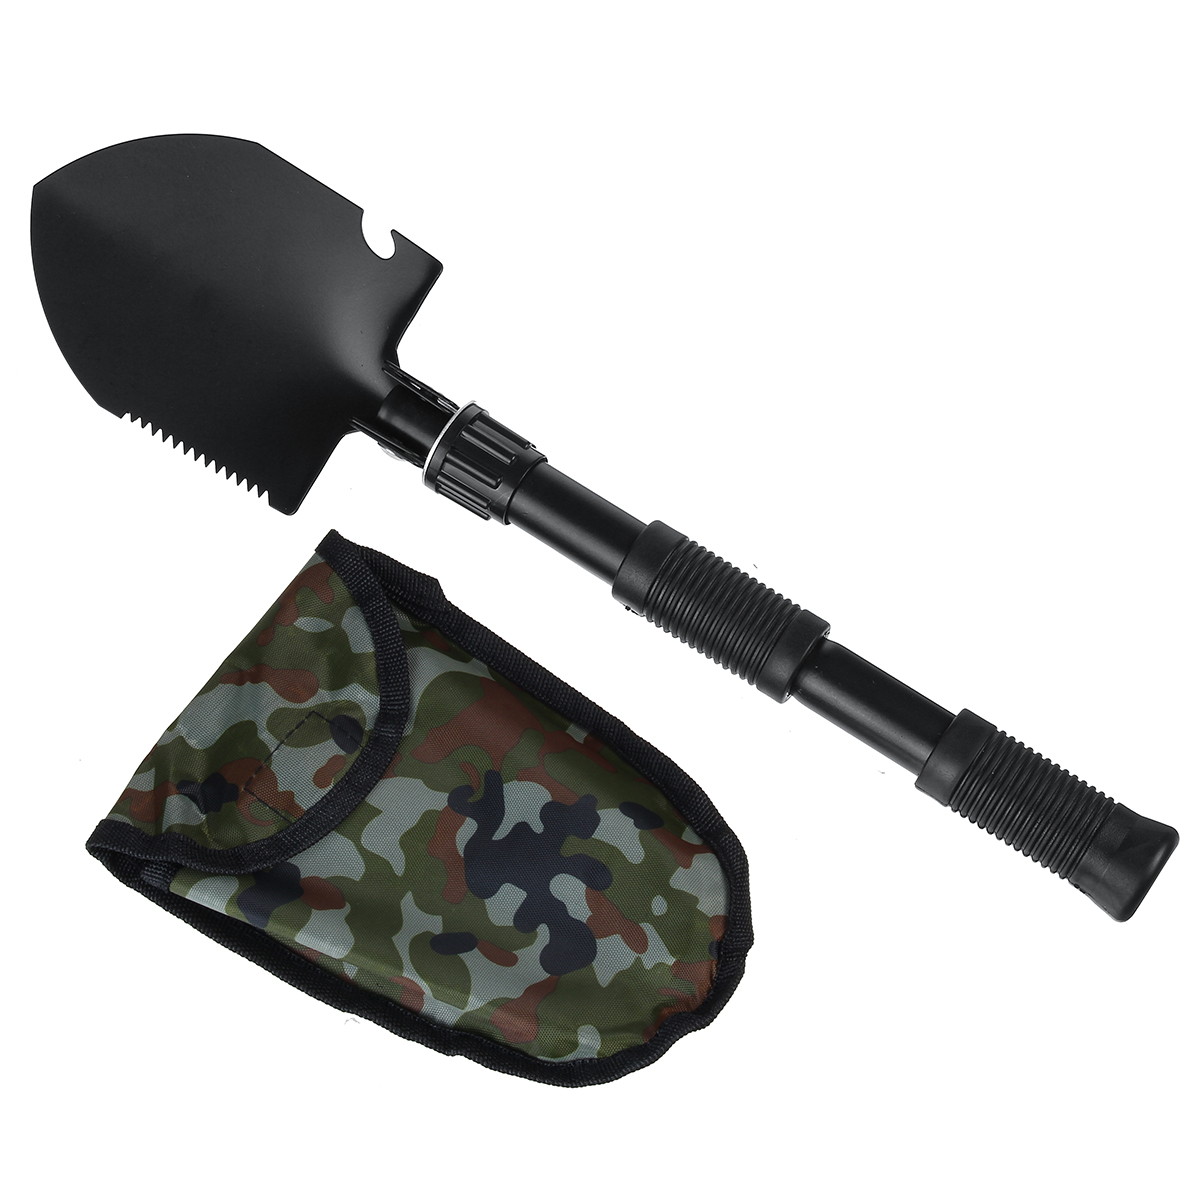 4-in-1-Multifunctional-Camping-Folding-Shovel-Carbon-Steel-Garden-Hiking-Outdoor-Activity-Tool-1810044-3